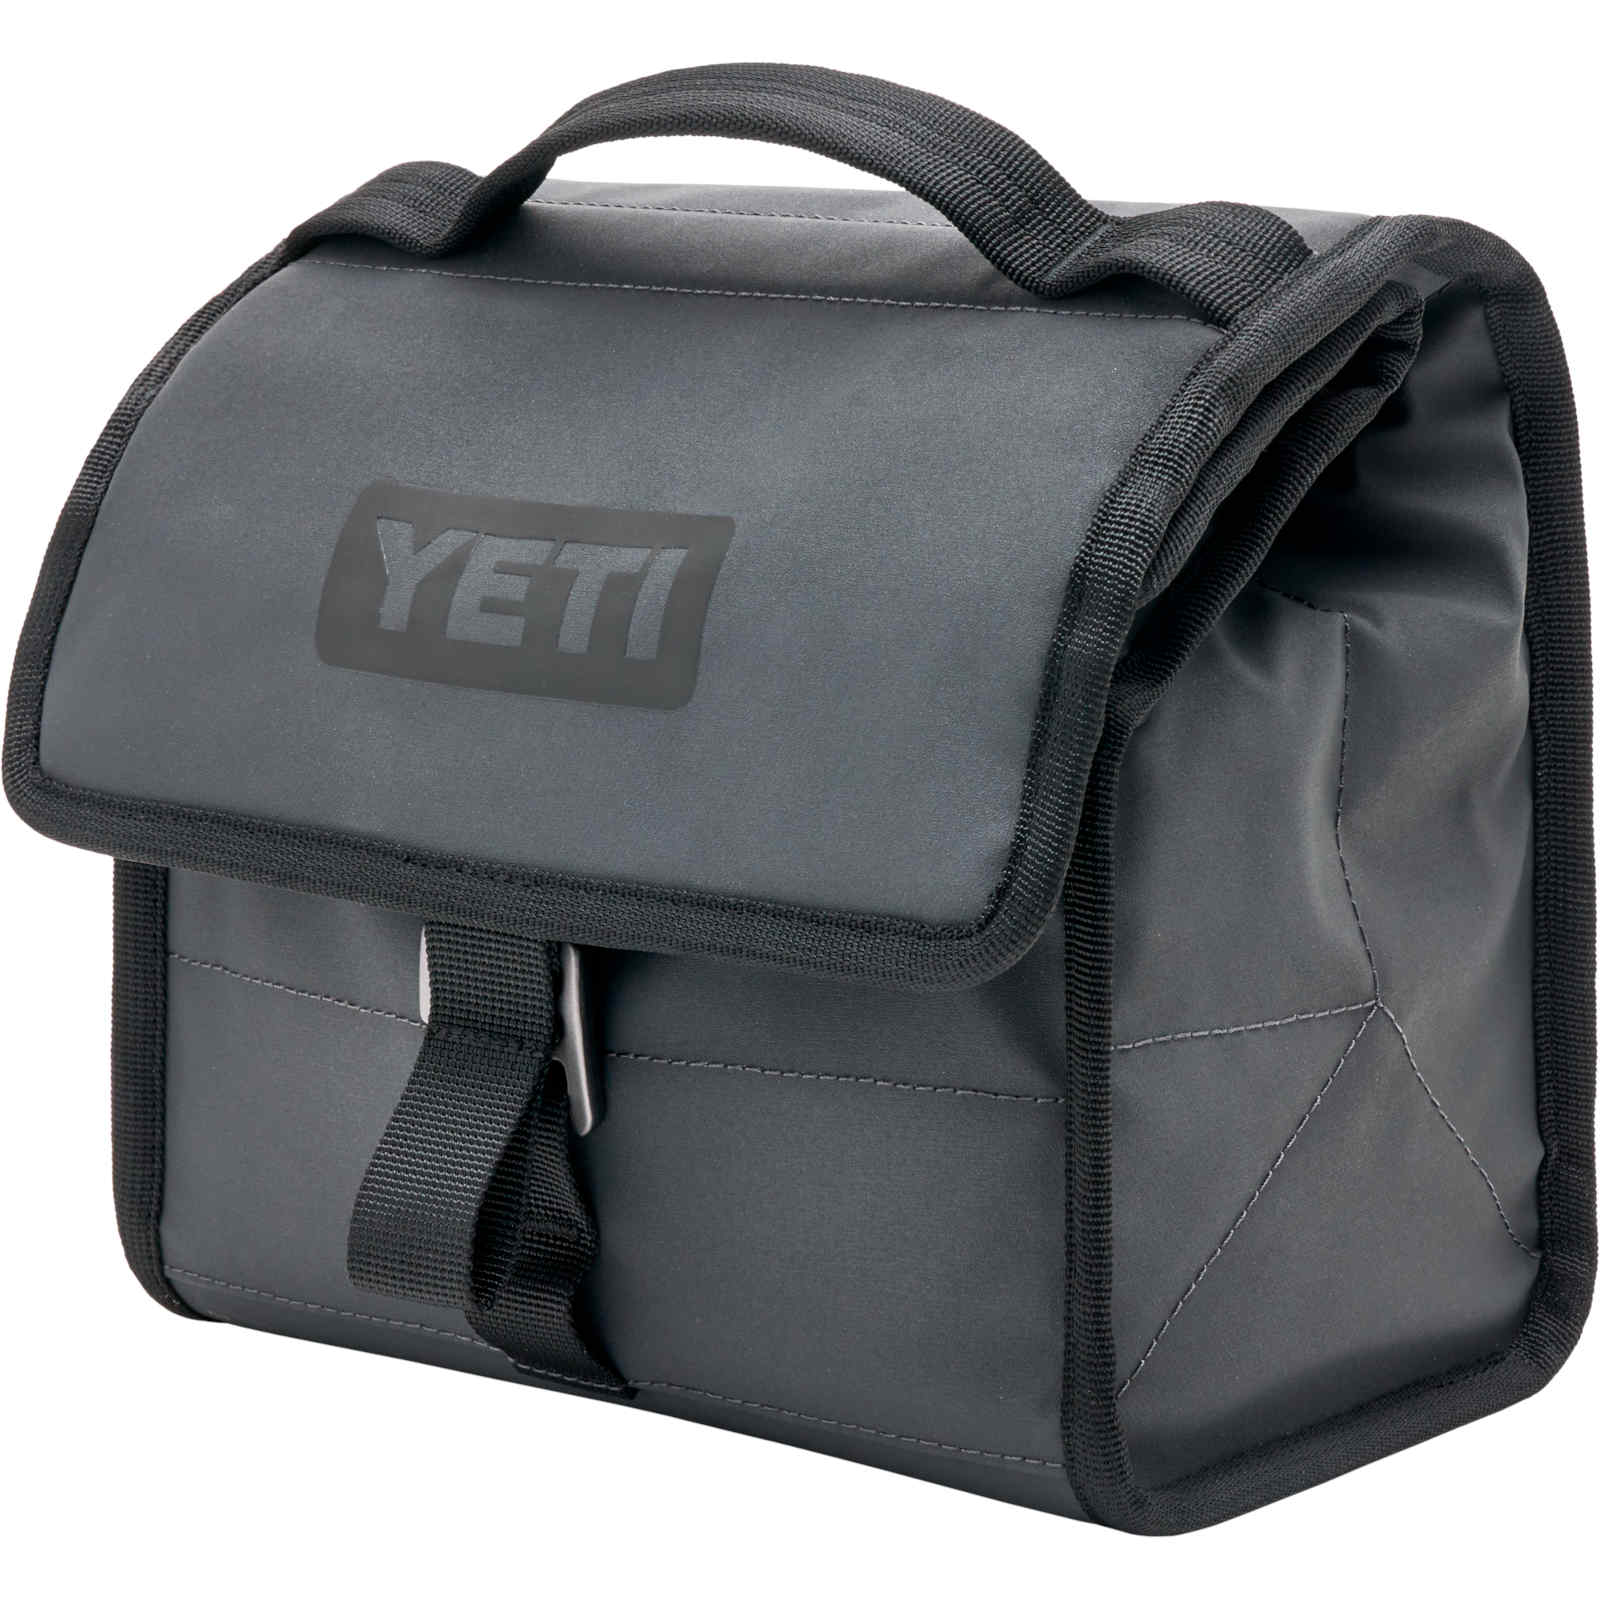 Product Yeti Day Trip Charcoal Gray Lunch Bag Horizontal Angle View